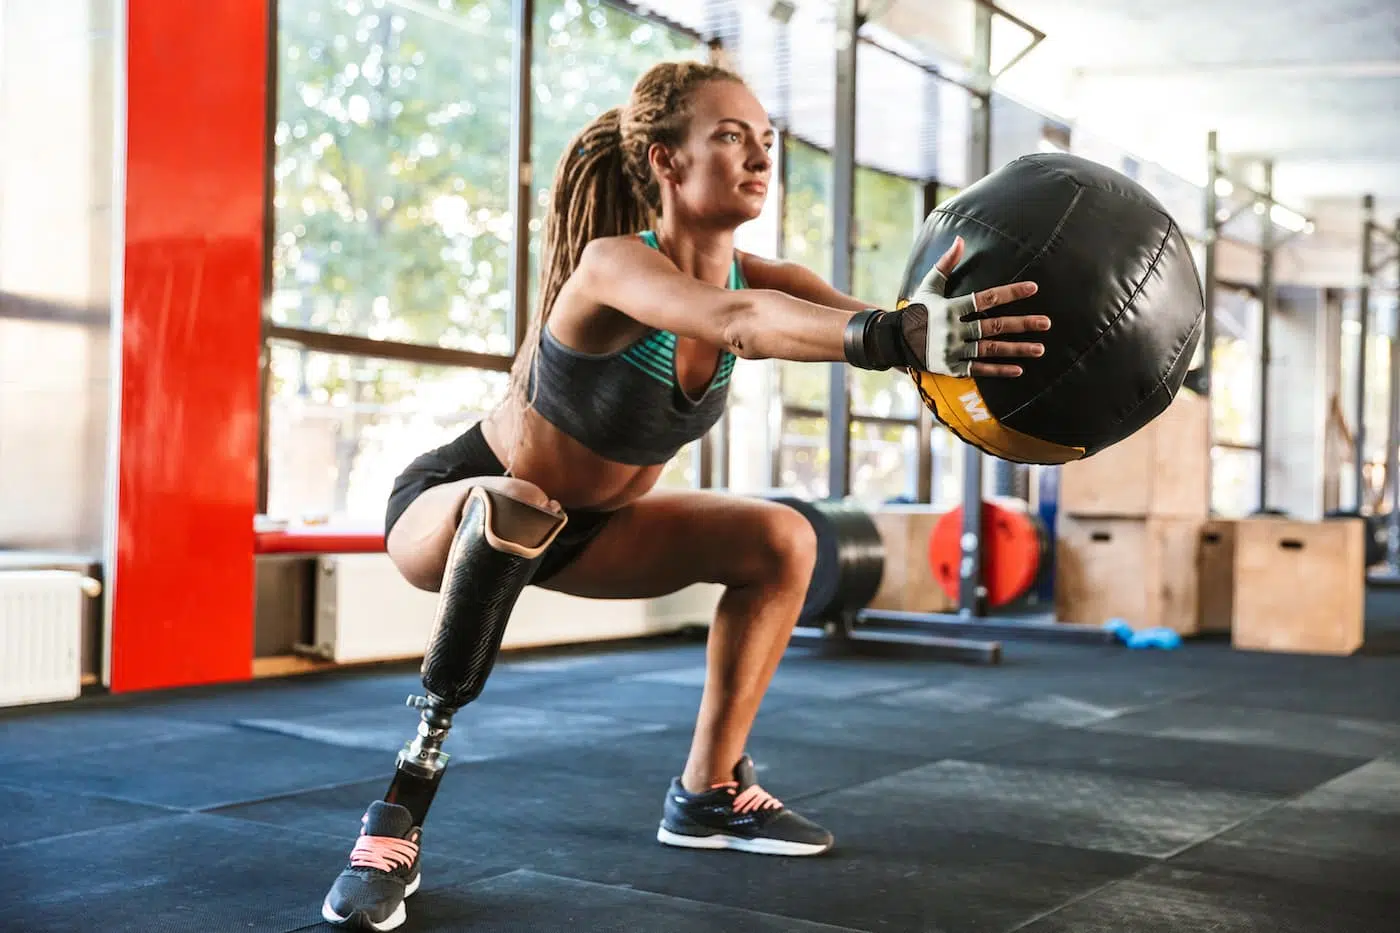 Woman with prosthesis in tracksuit doing squats with fitness ball in gym